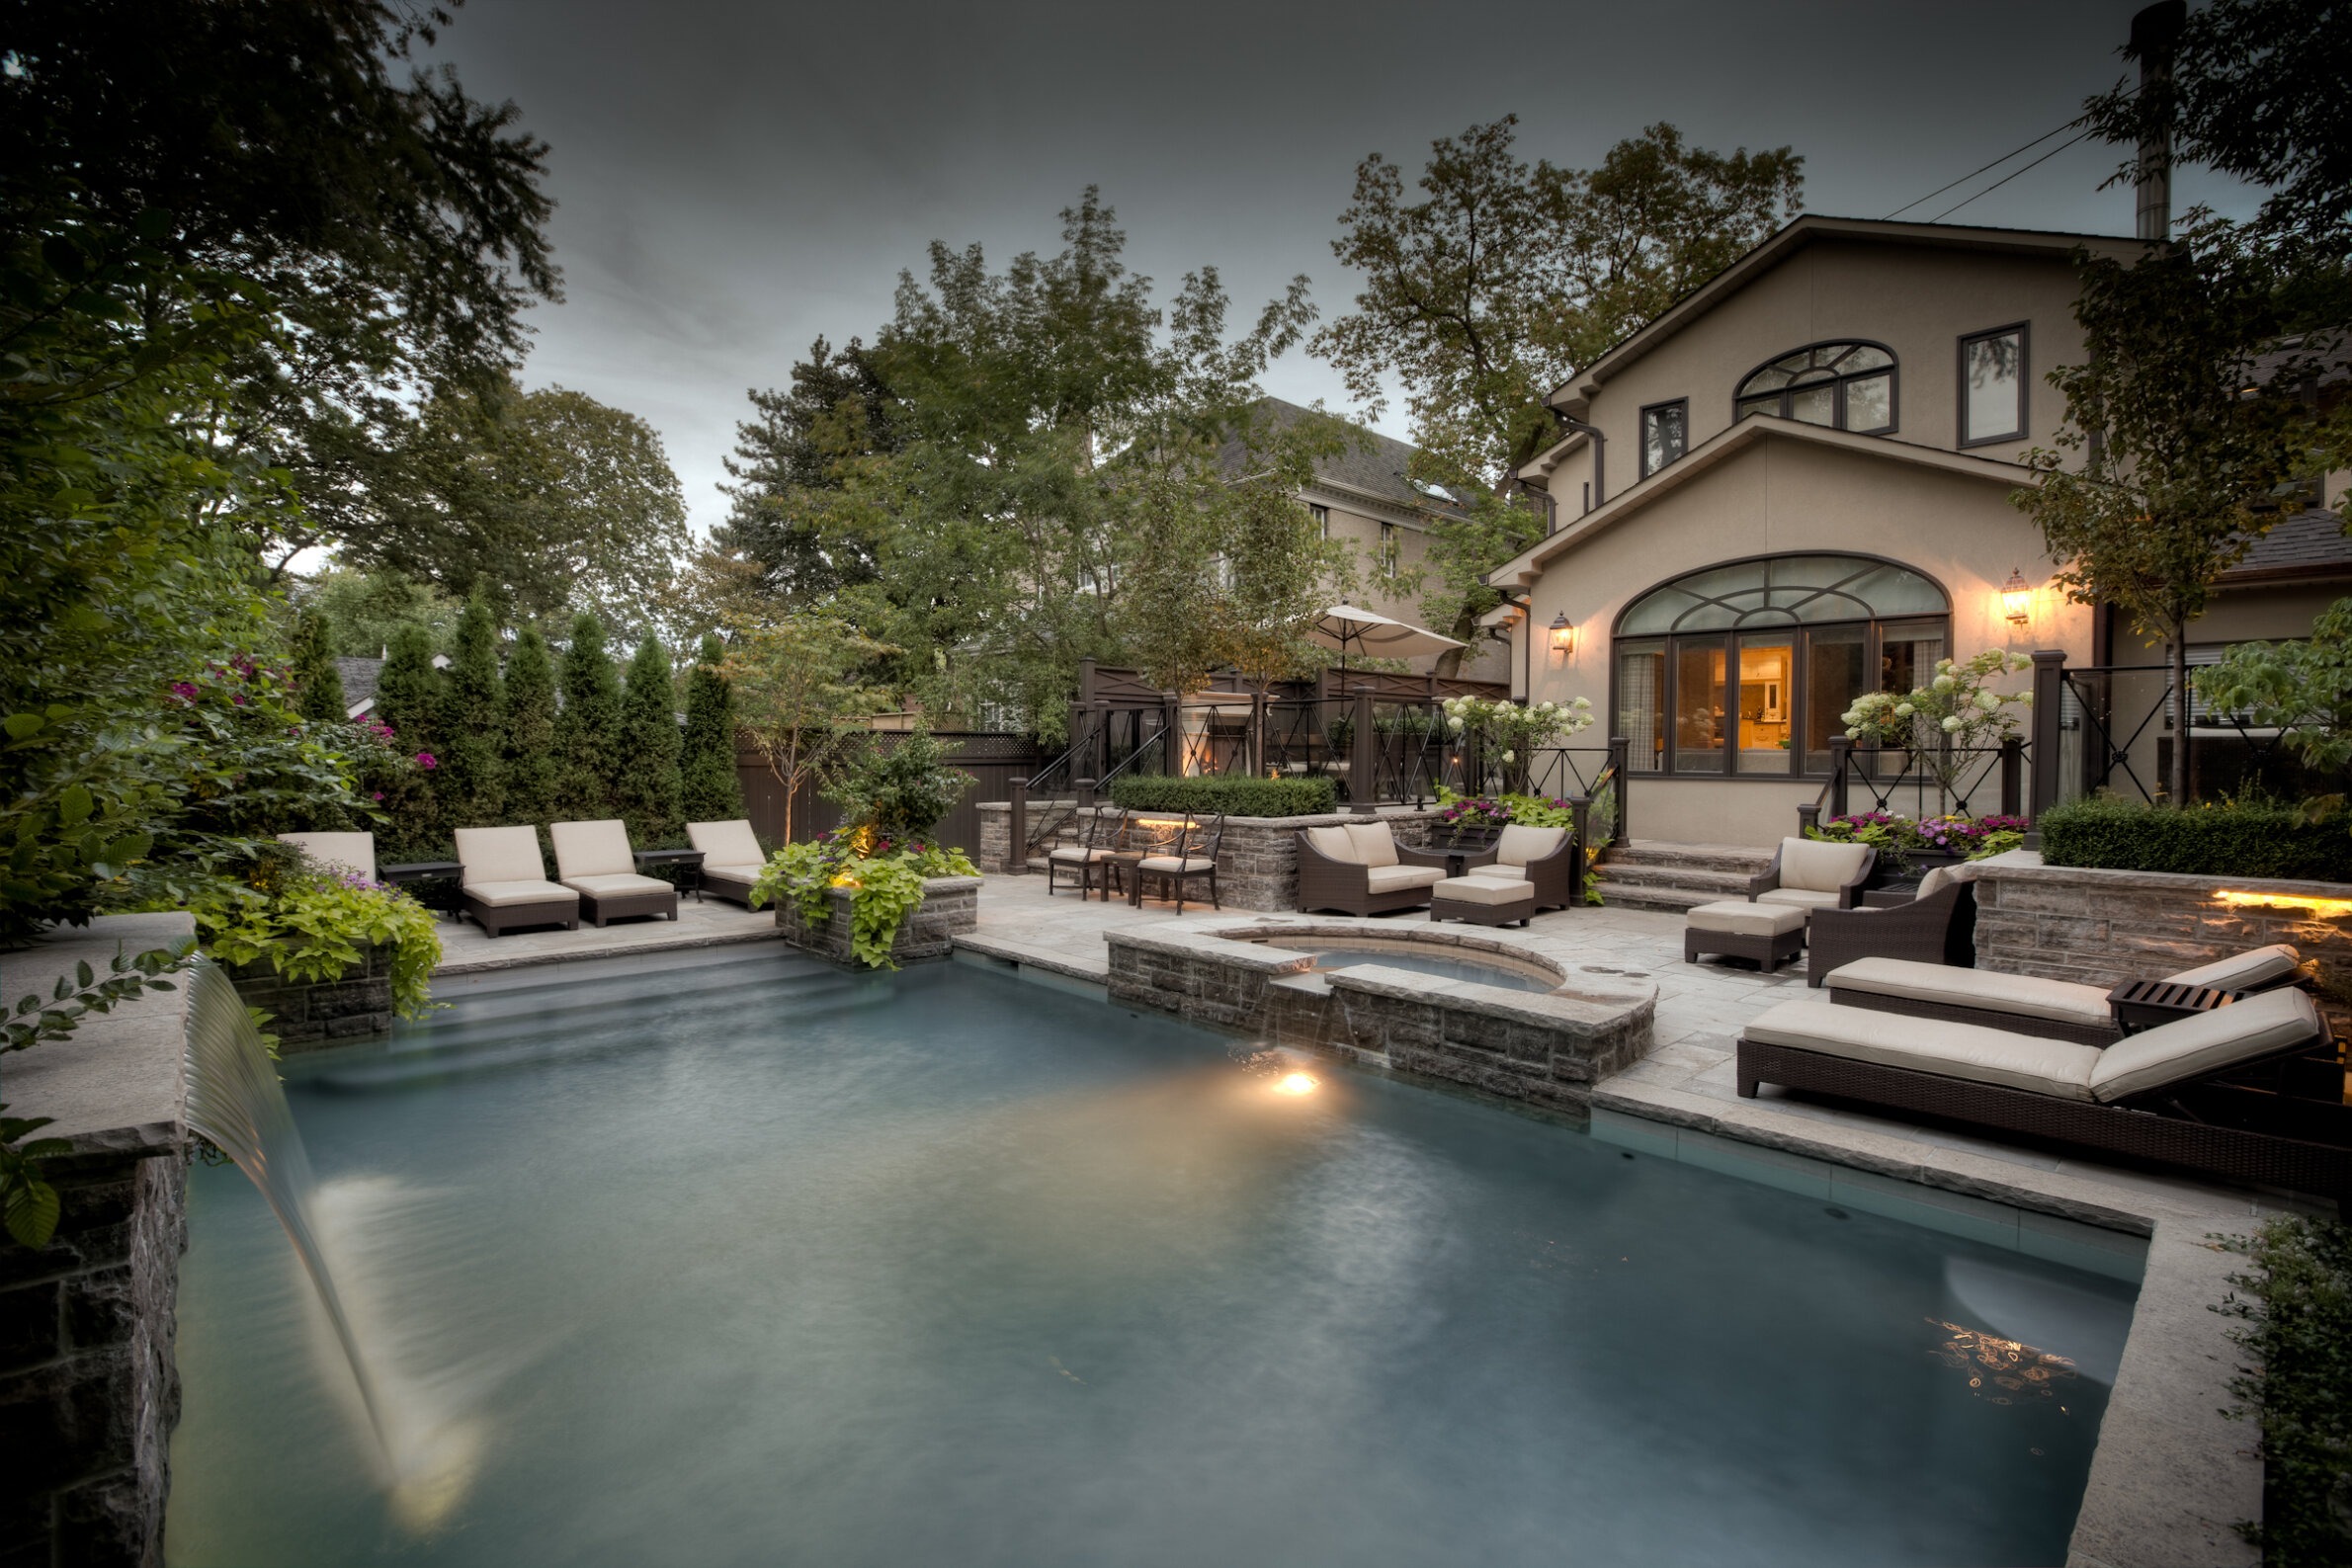 An upscale backyard with a swimming pool, elegant outdoor furniture, lush landscaping, stonework, and a warmly lit residence in a serene twilight setting.